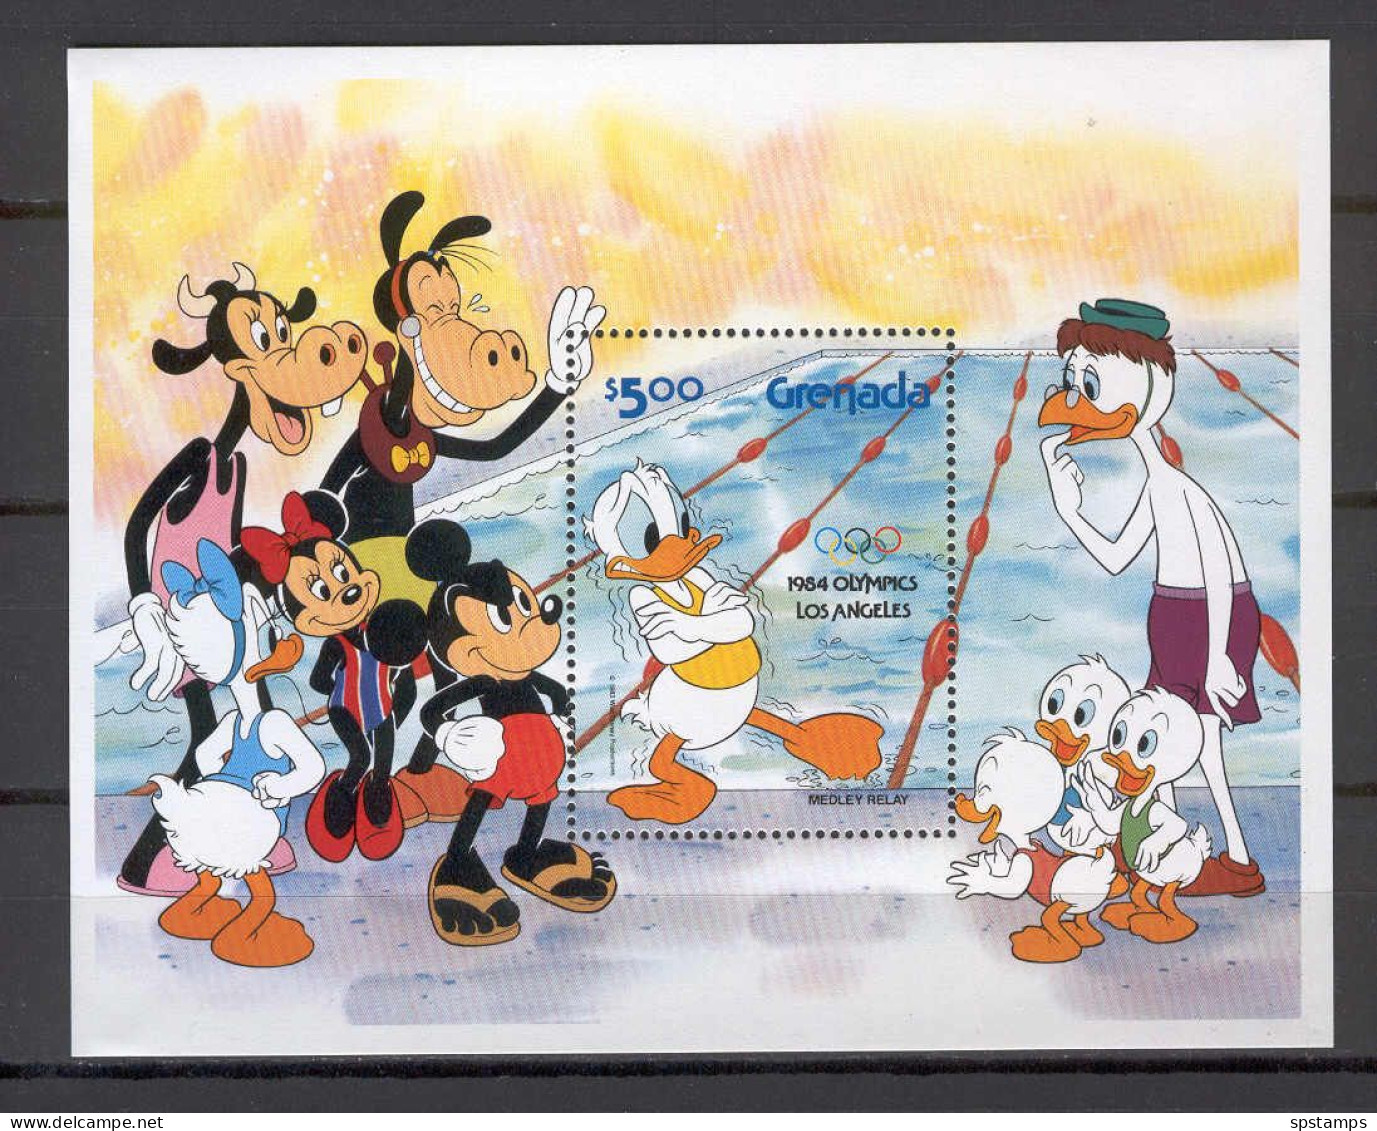 Disney Grenada 1984 Olympic Games Los Angeles With Rings MS MNH - Disney